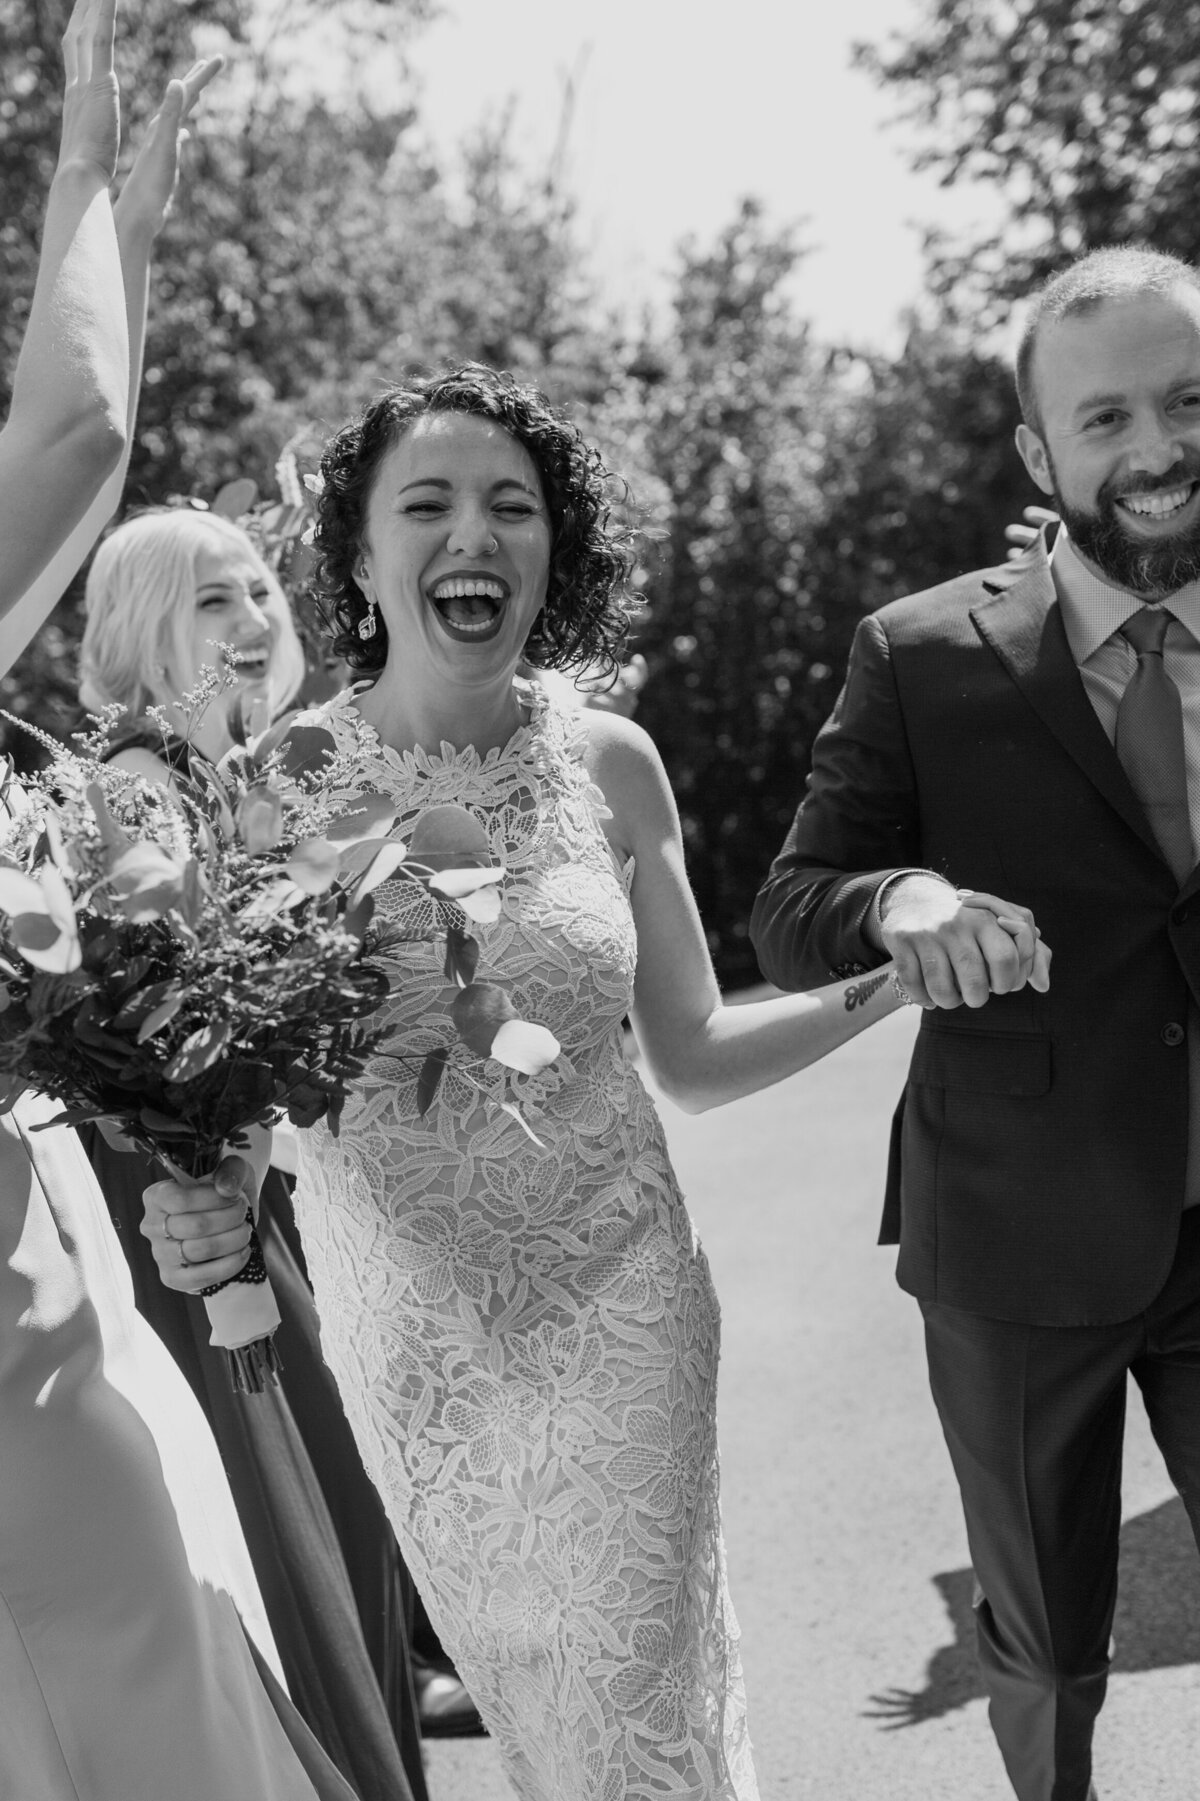 A happy candid moment of a bride and groom and their wedding party captured by Fort Worth wedding photographer, Megan Christine Studio